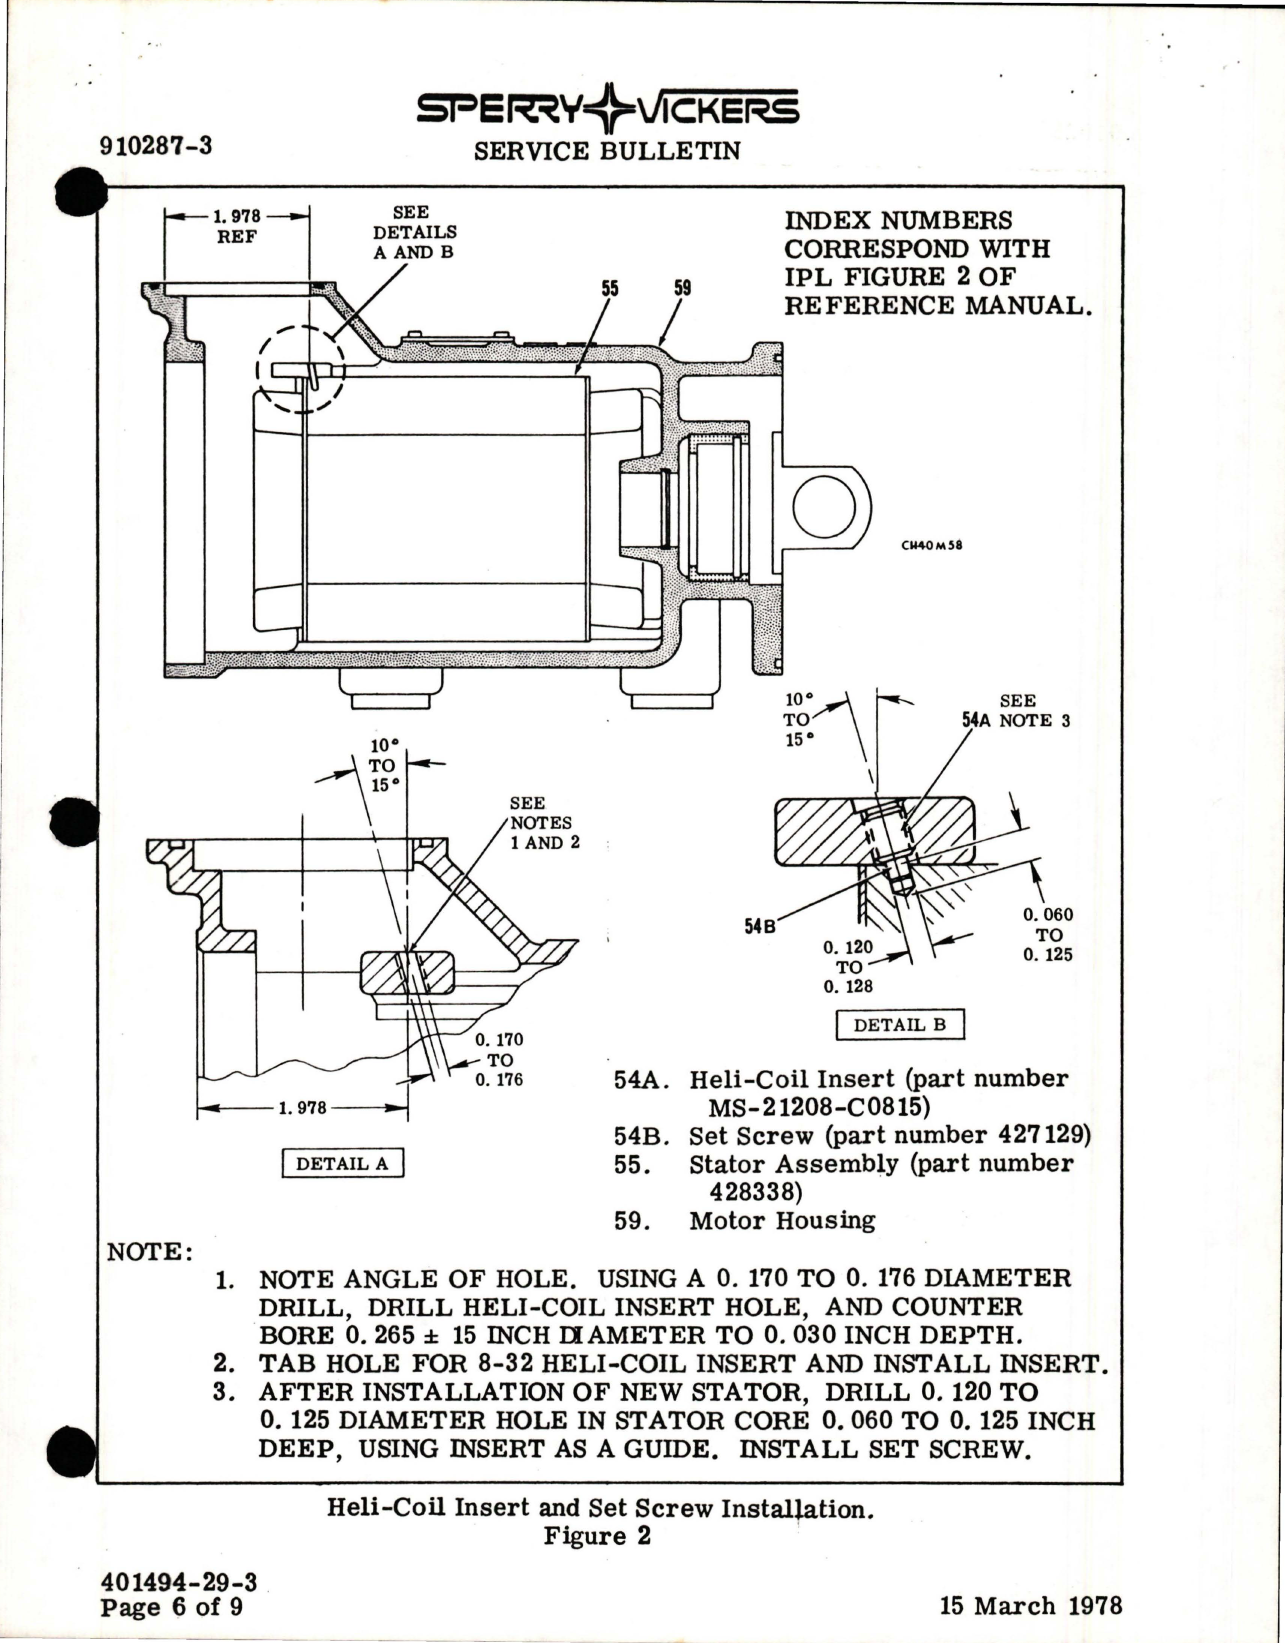 Sample page 5 from AirCorps Library document: Replacement of Electric Motor Stator Assembly - Hydraulic Motorpump